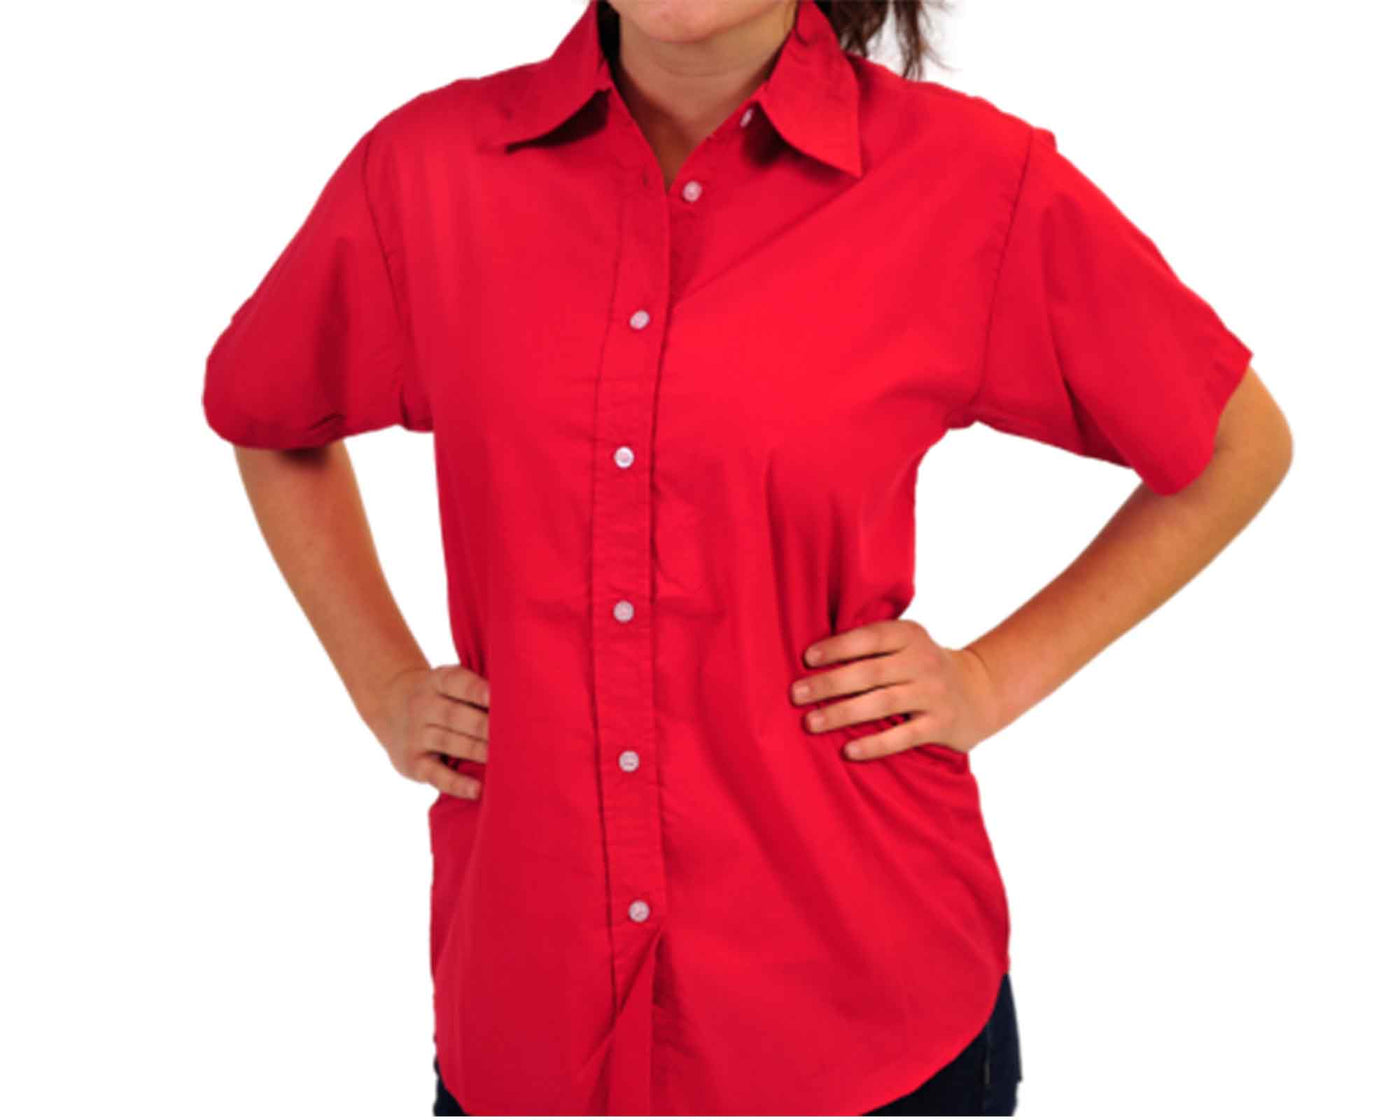 lady wearing red poplin shirt with solid button